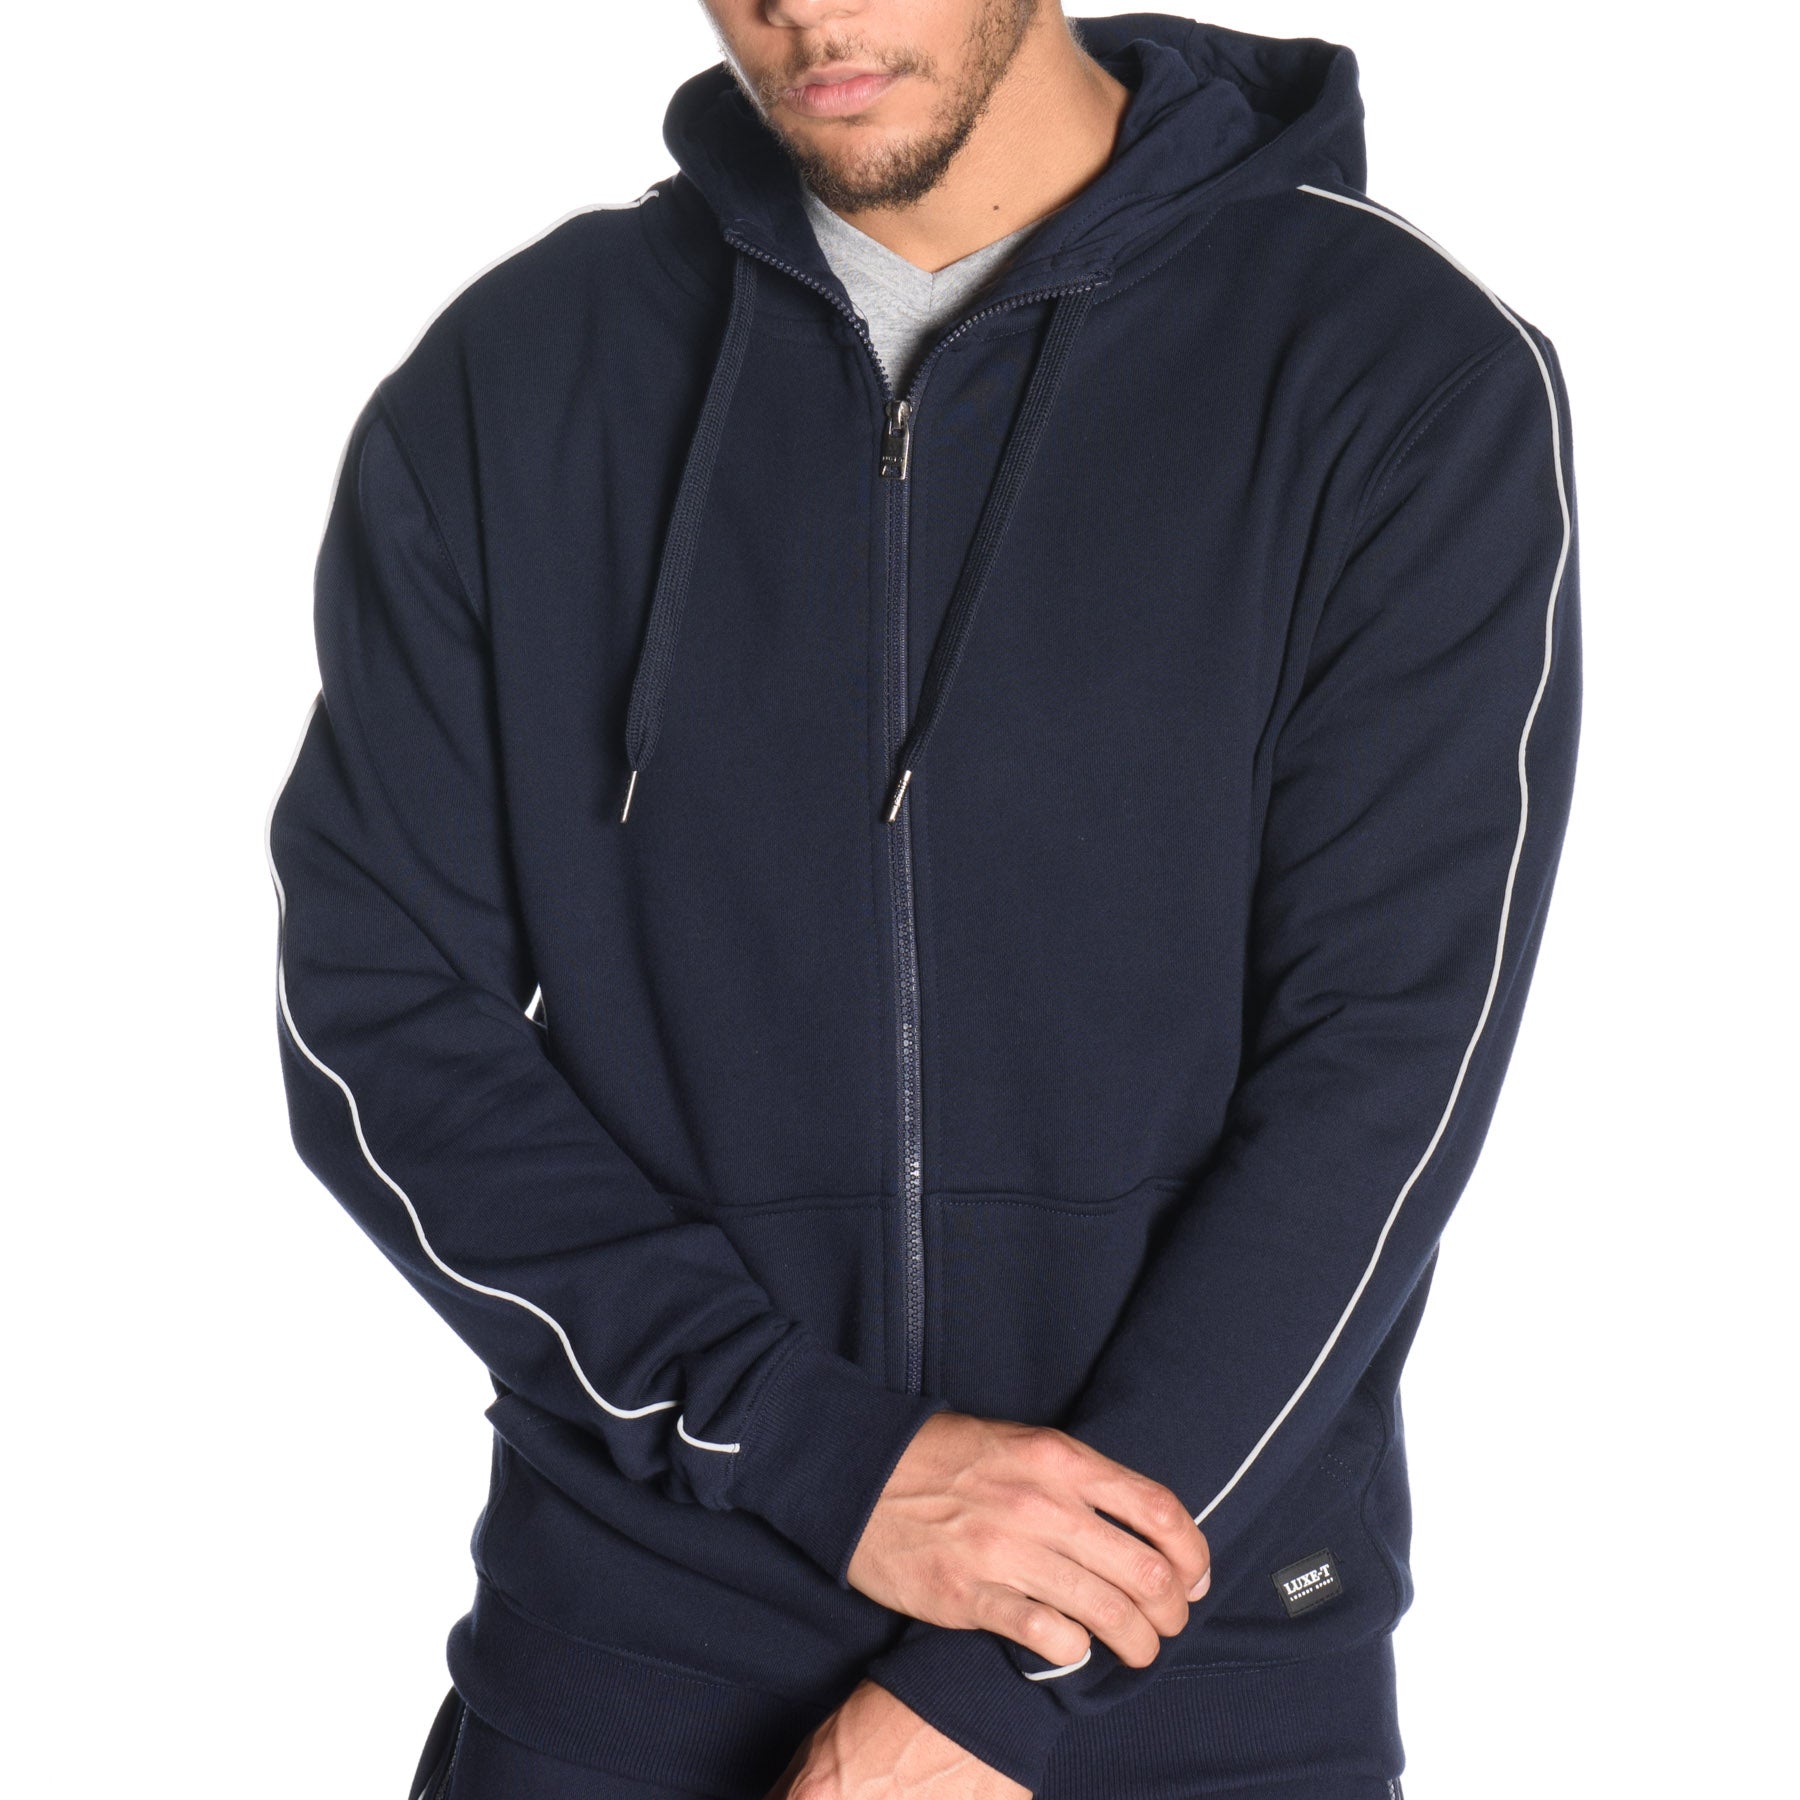 Full Zip Hoodie with Reflective Piping